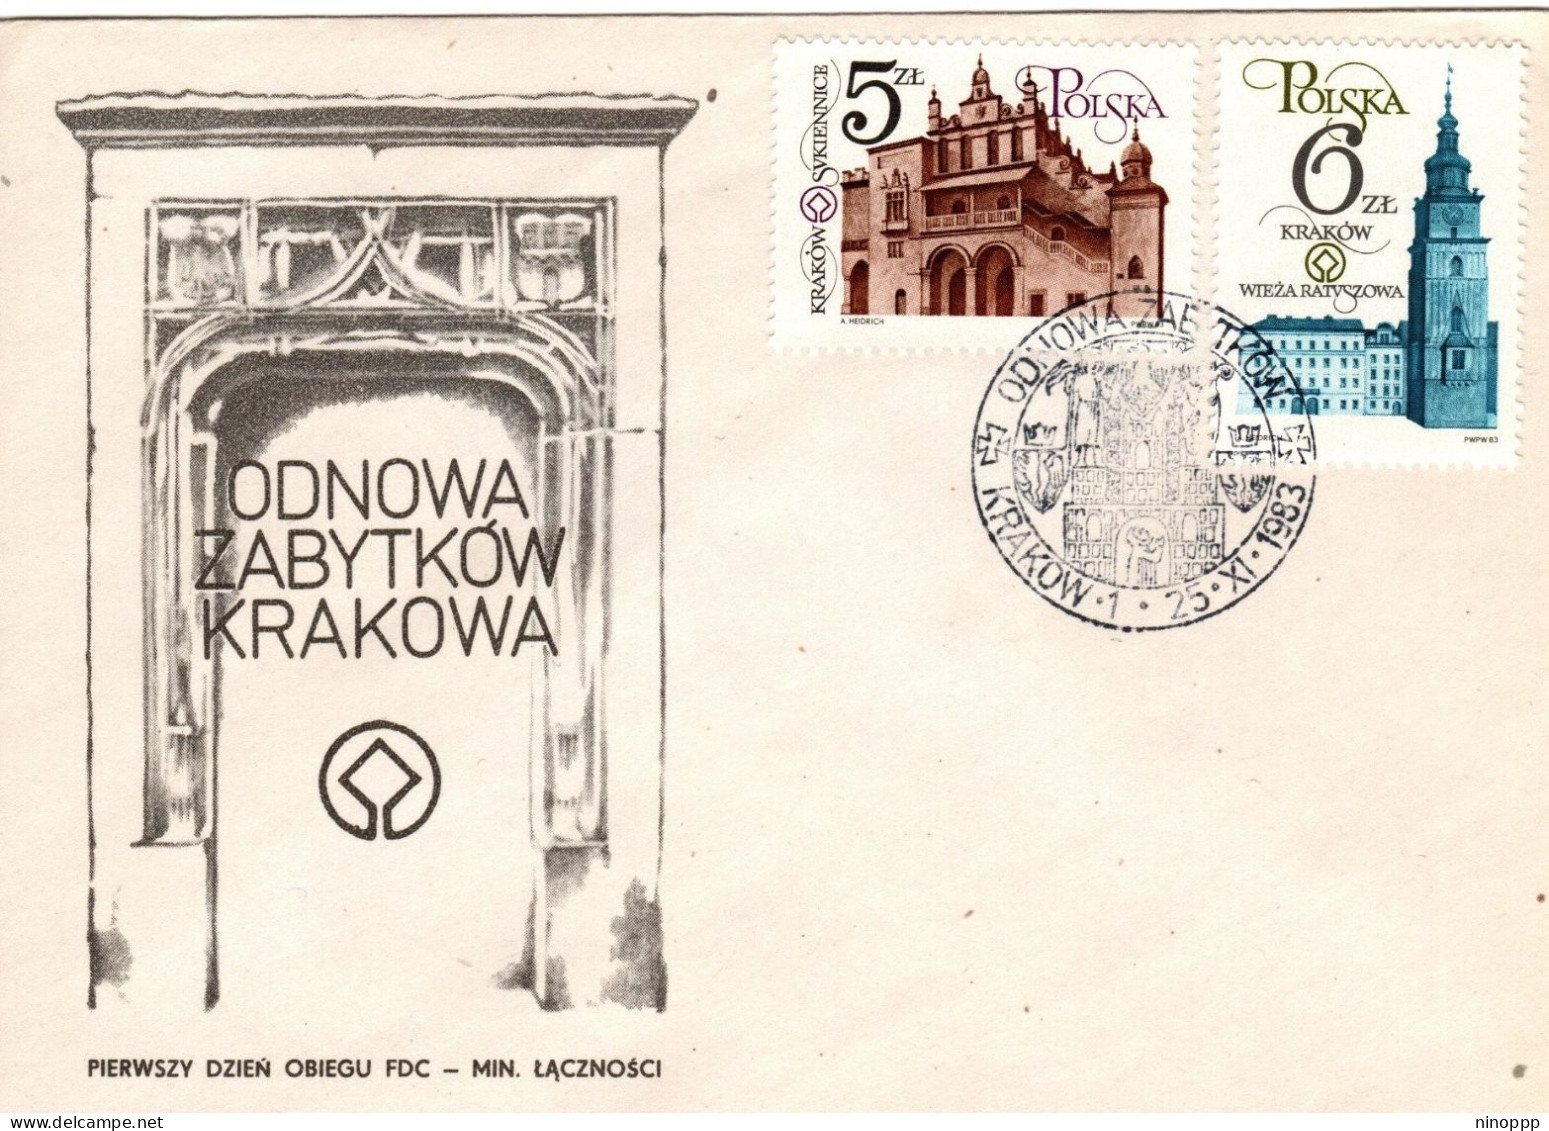 Poland 1983 Cracow Restoration, First Day Cover - FDC